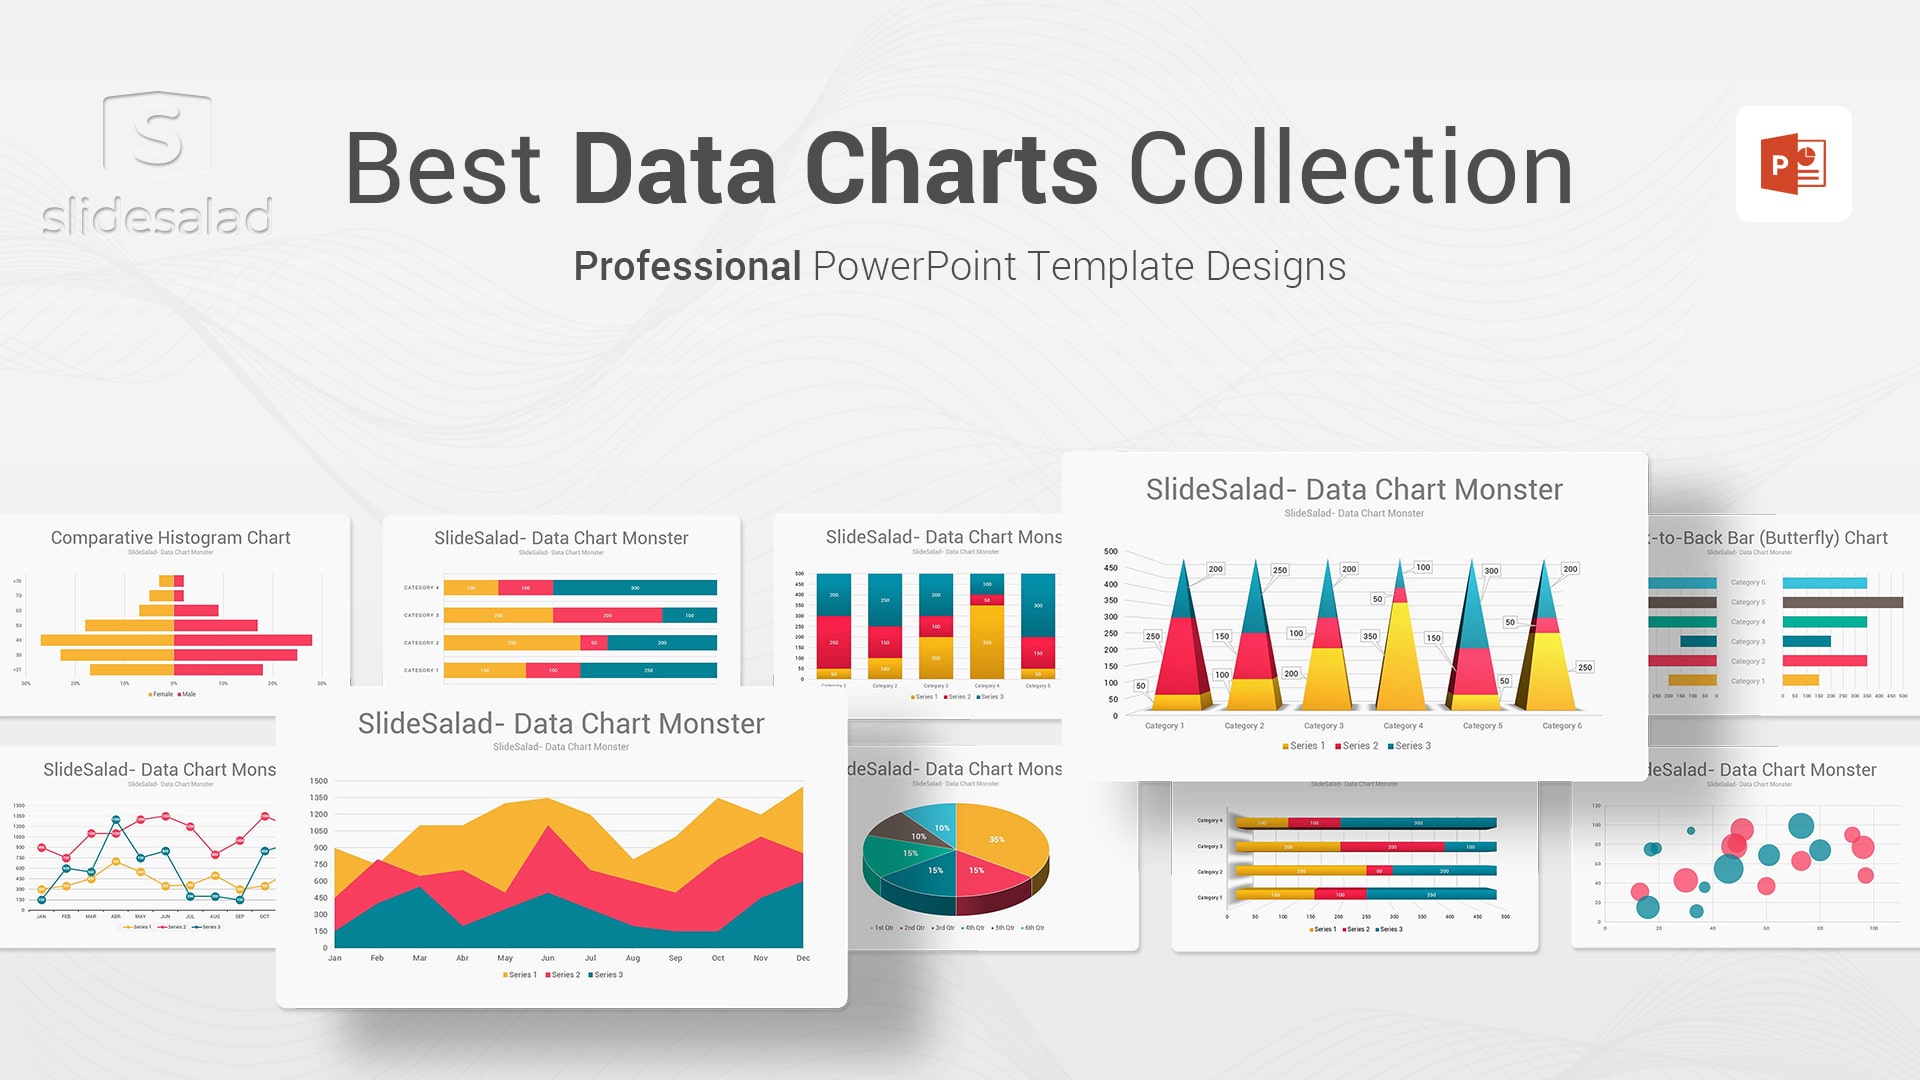 Data Chart Monster PowerPoint Presentation Template - Amazing Data Chart Templates for Sales Presentations